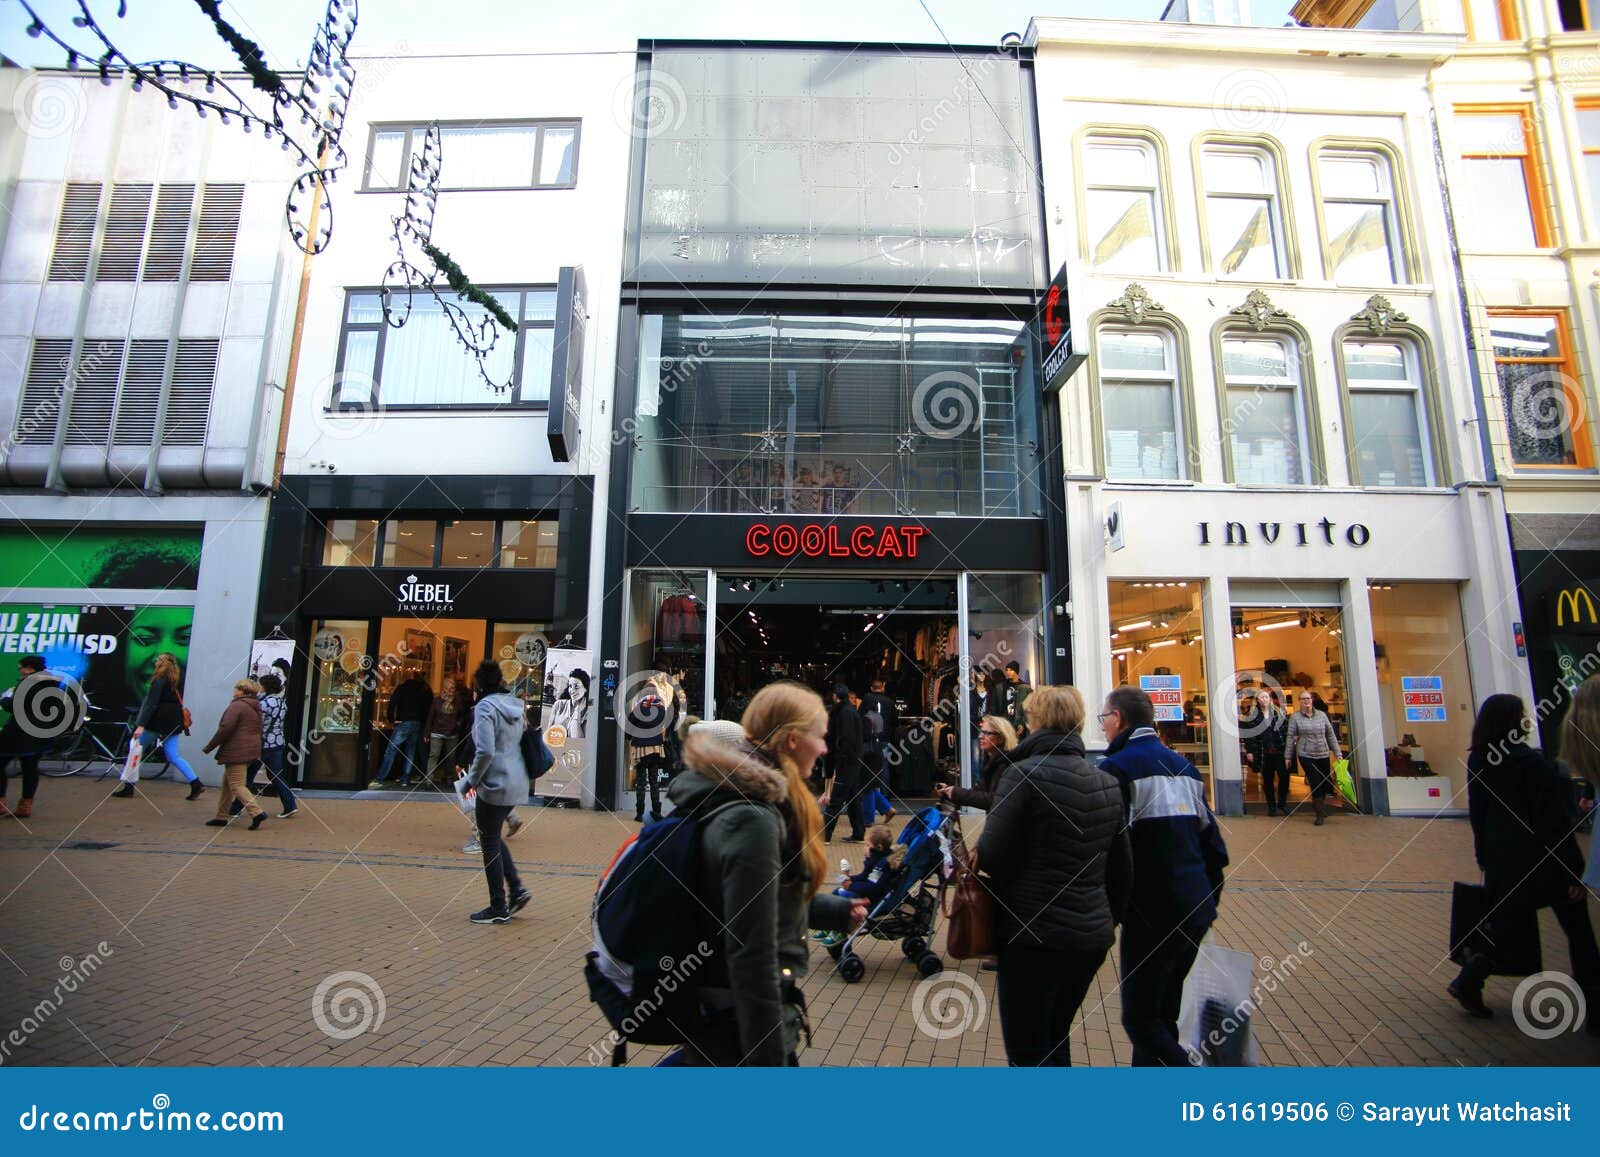 Grote Markt Shopping Plaza in Netherlands Editorial Photo - Image of ...